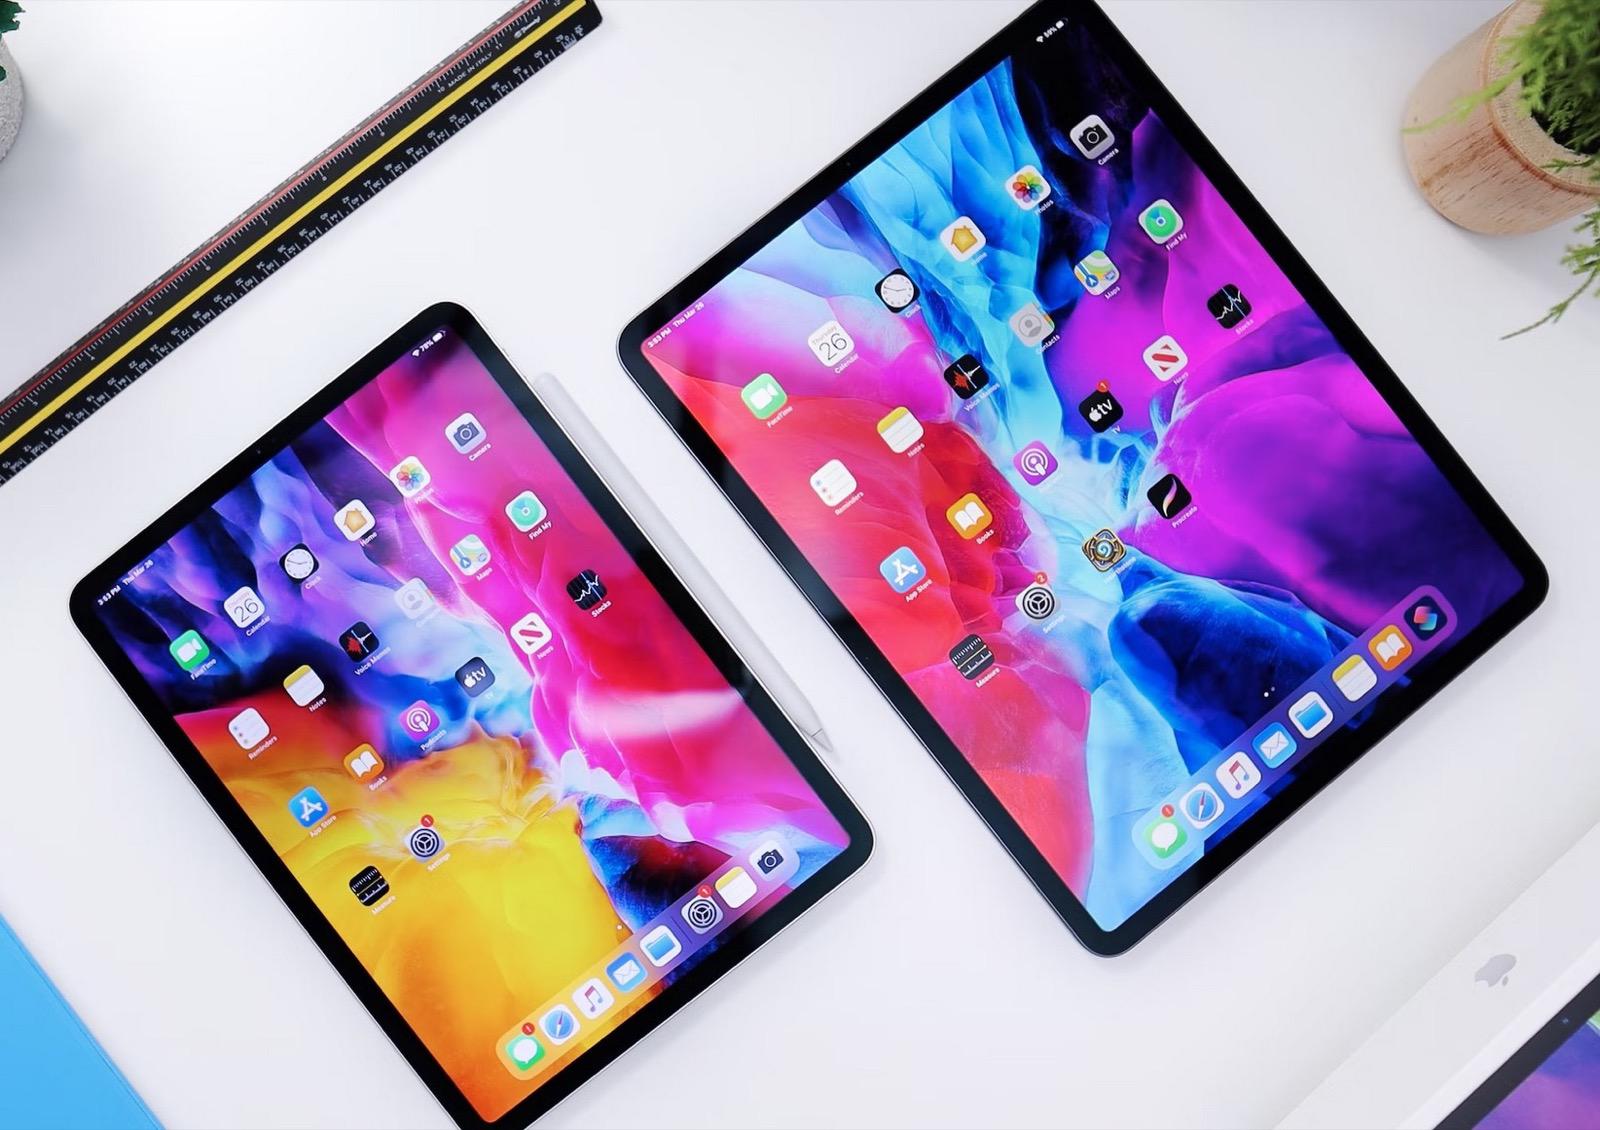 Apple Announces Streamlined iPad Lineup with New Pro and Air Models for